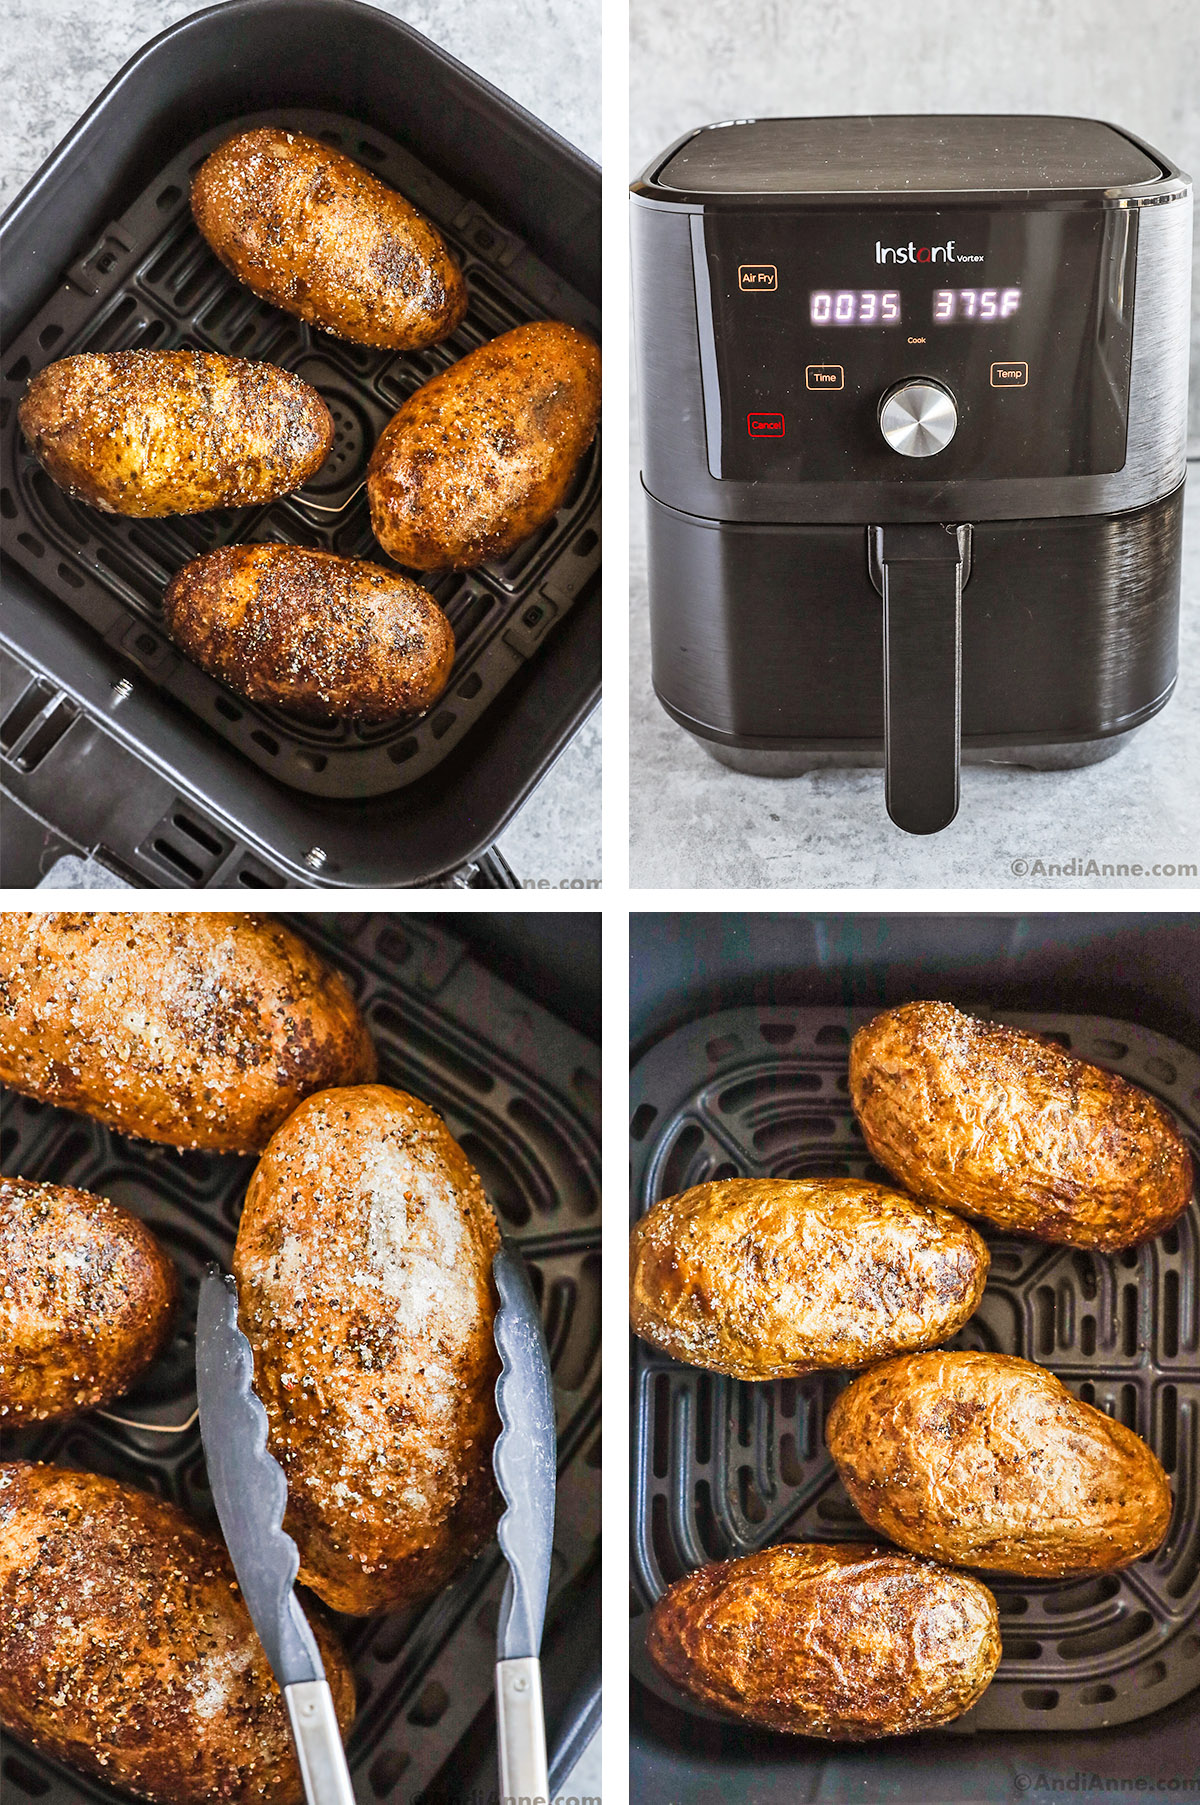 Four images, first is potatoes in air fryer basket, an air fryer, tongs holding a potato and baked potatoes in air fryer basket.